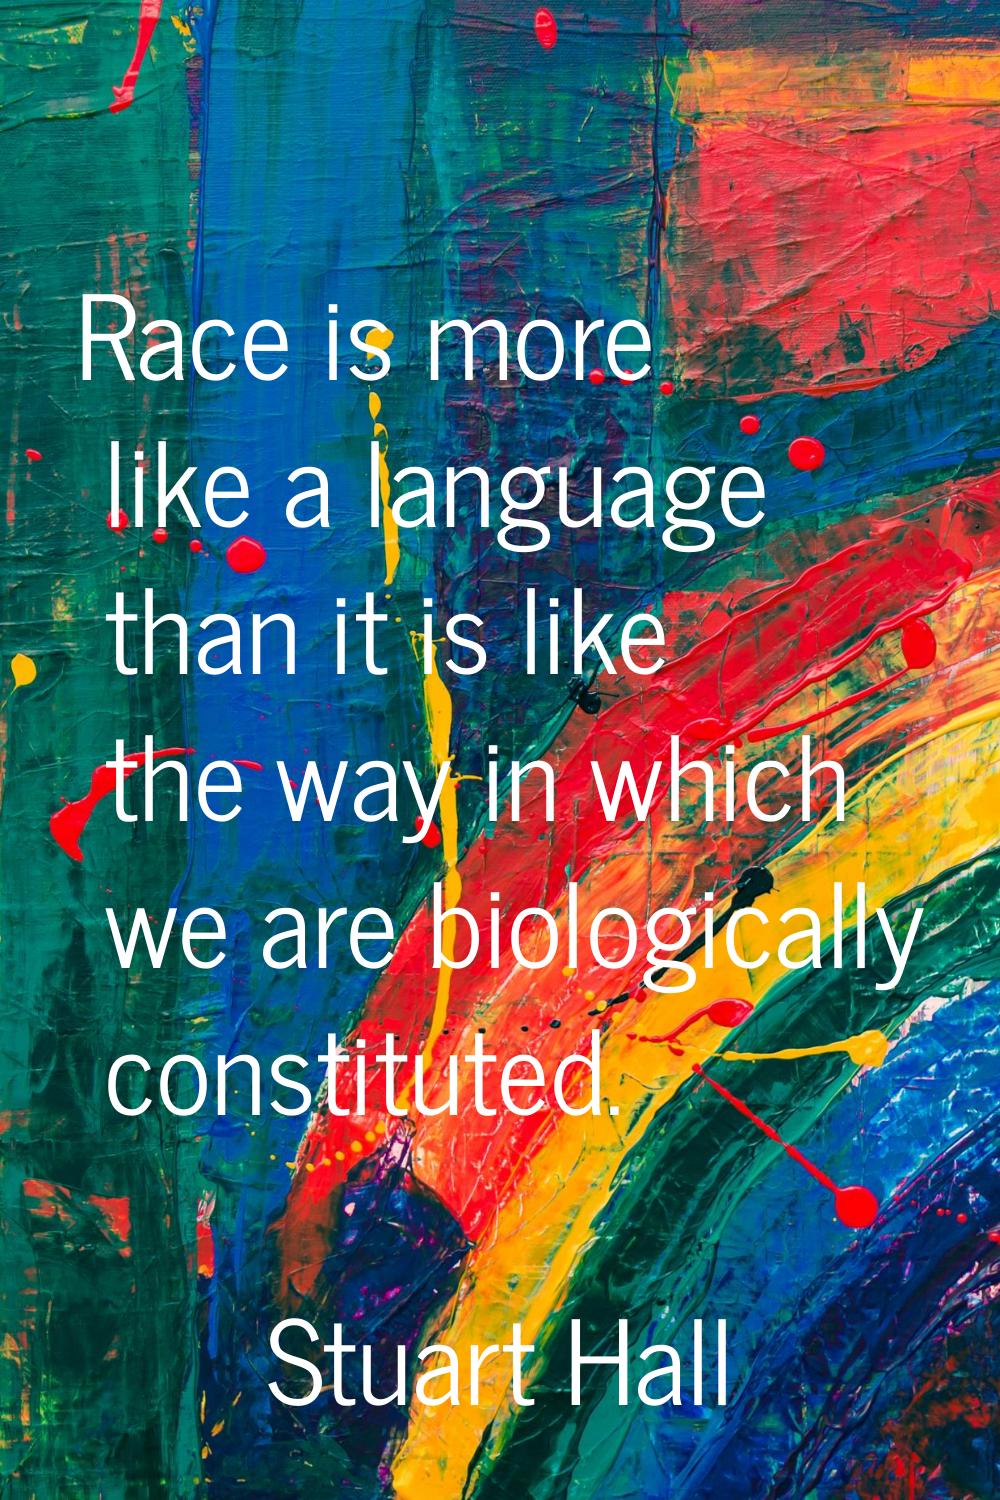 Race is more like a language than it is like the way in which we are biologically constituted.